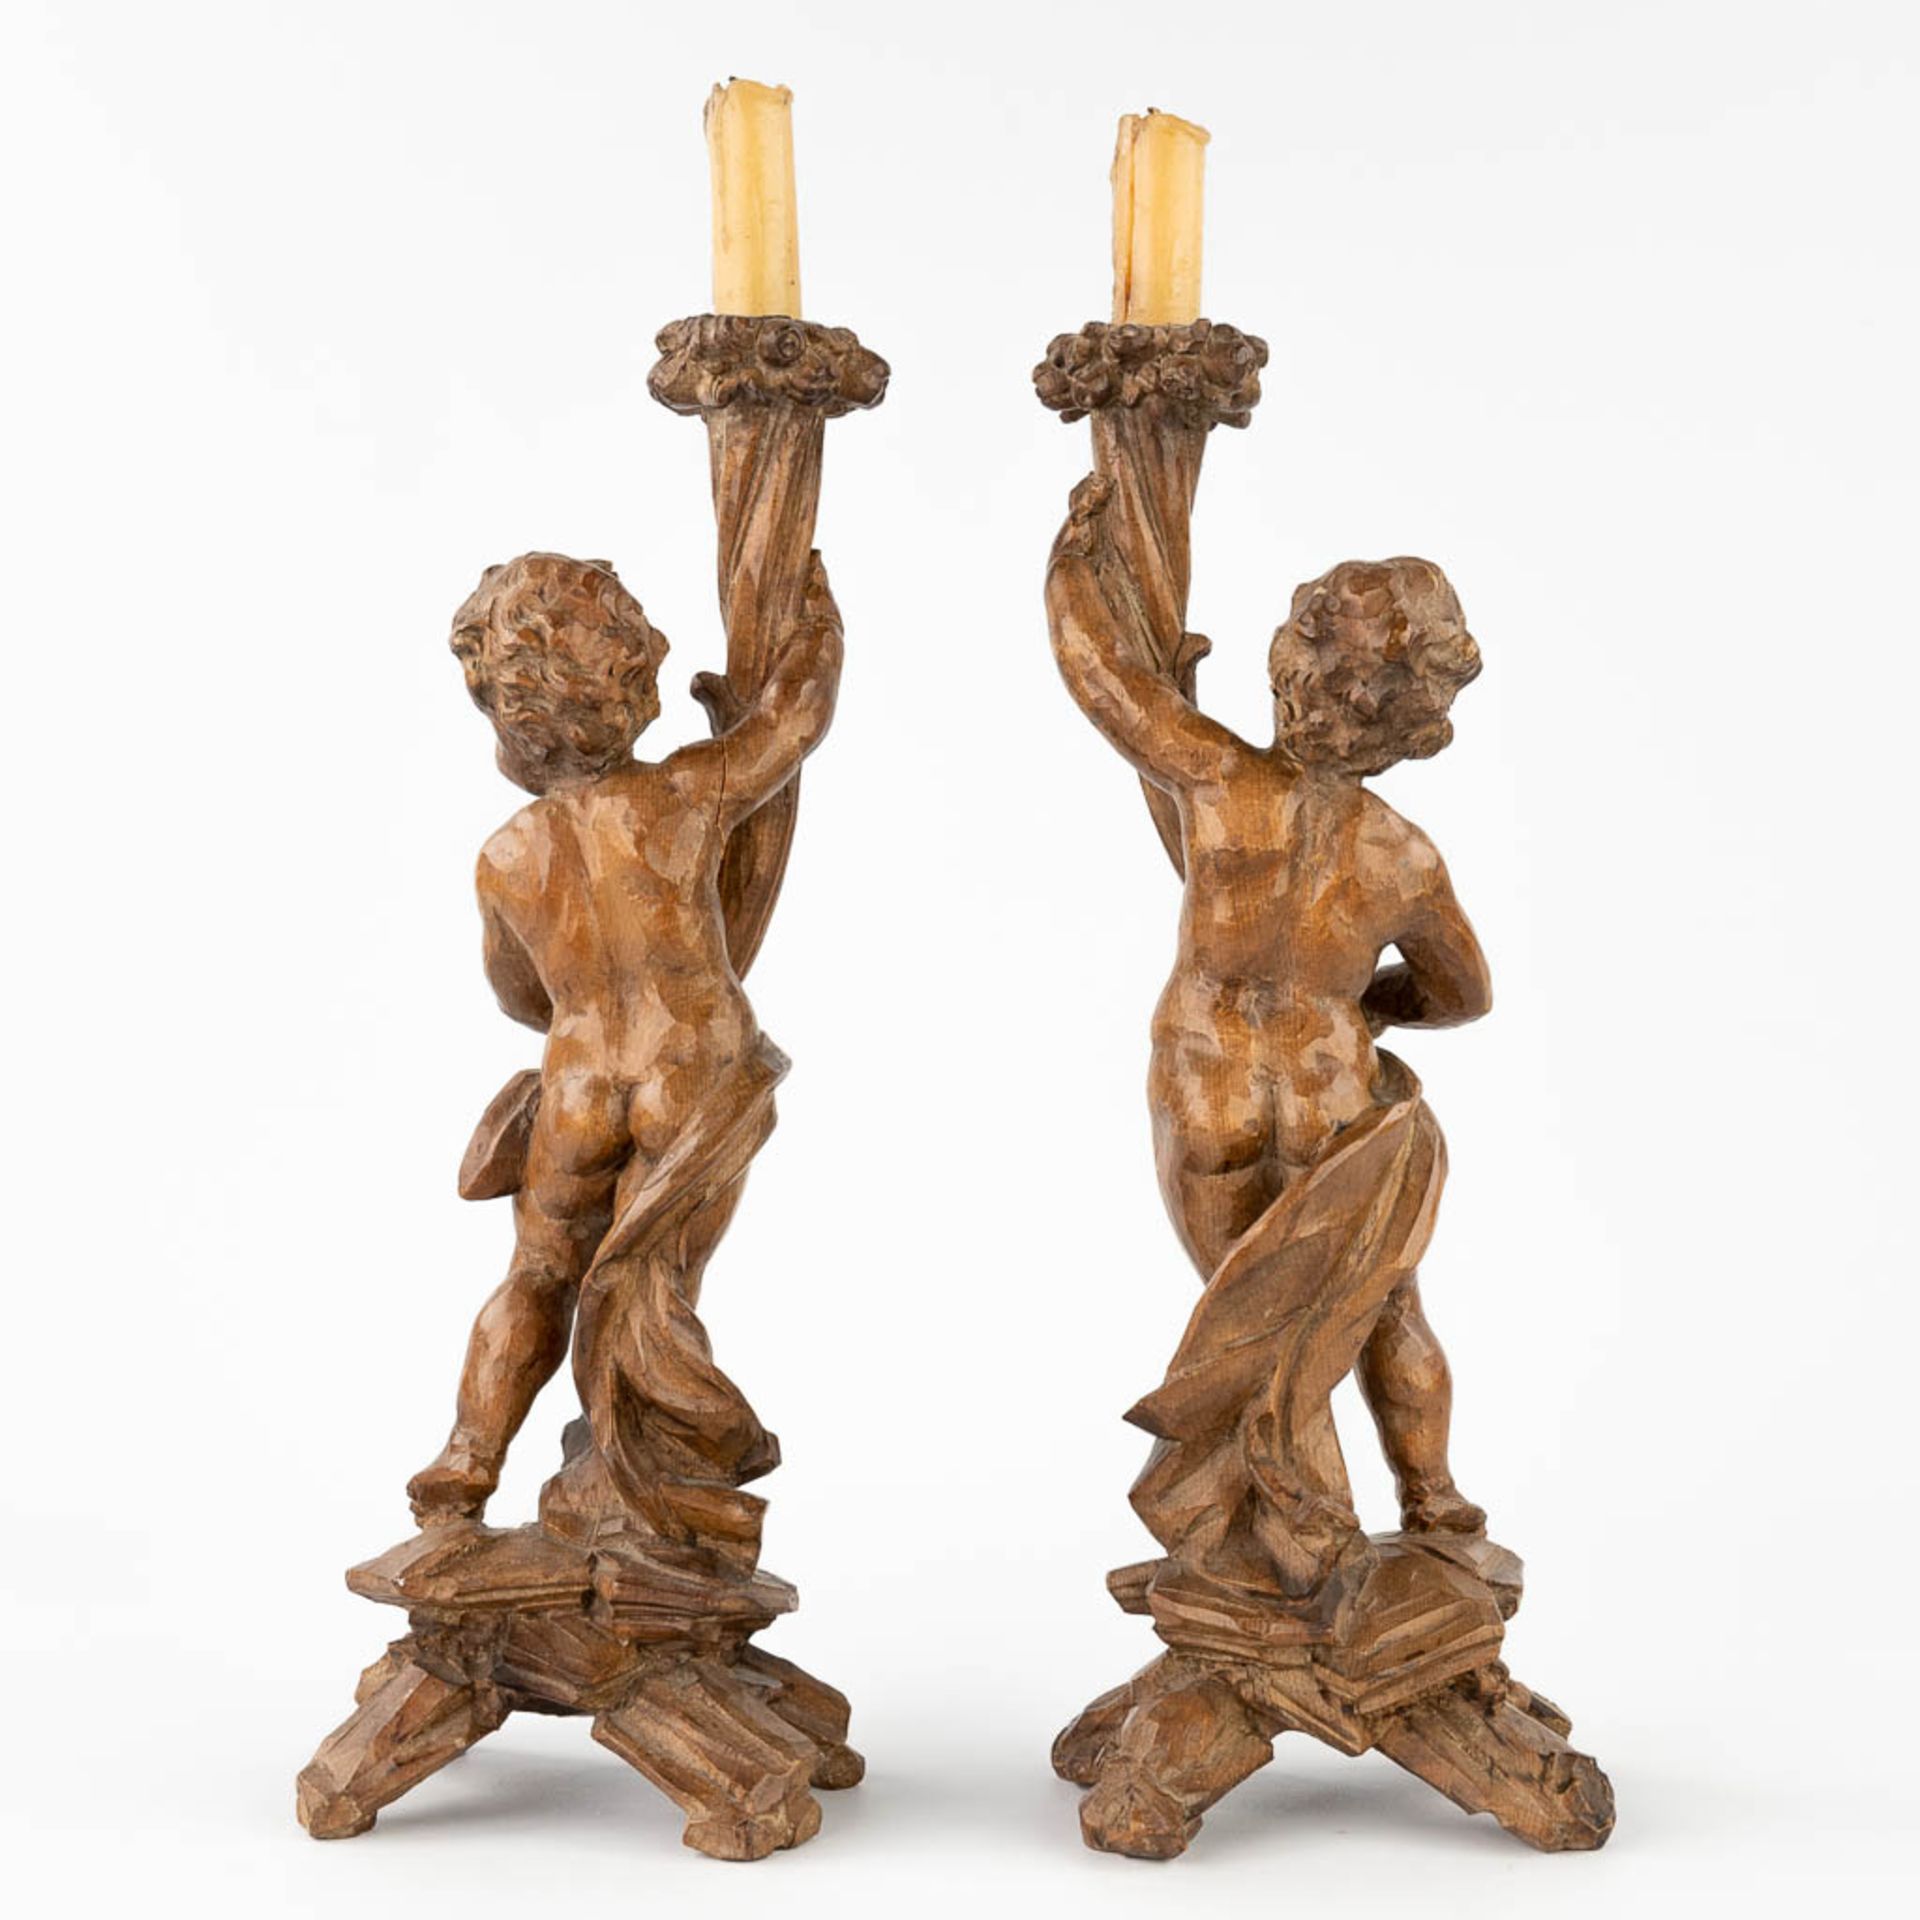 A pair of wood-sculptured candle holders, with putti. 19th C. (L:9 x W:12 x H:34 cm) - Image 4 of 12